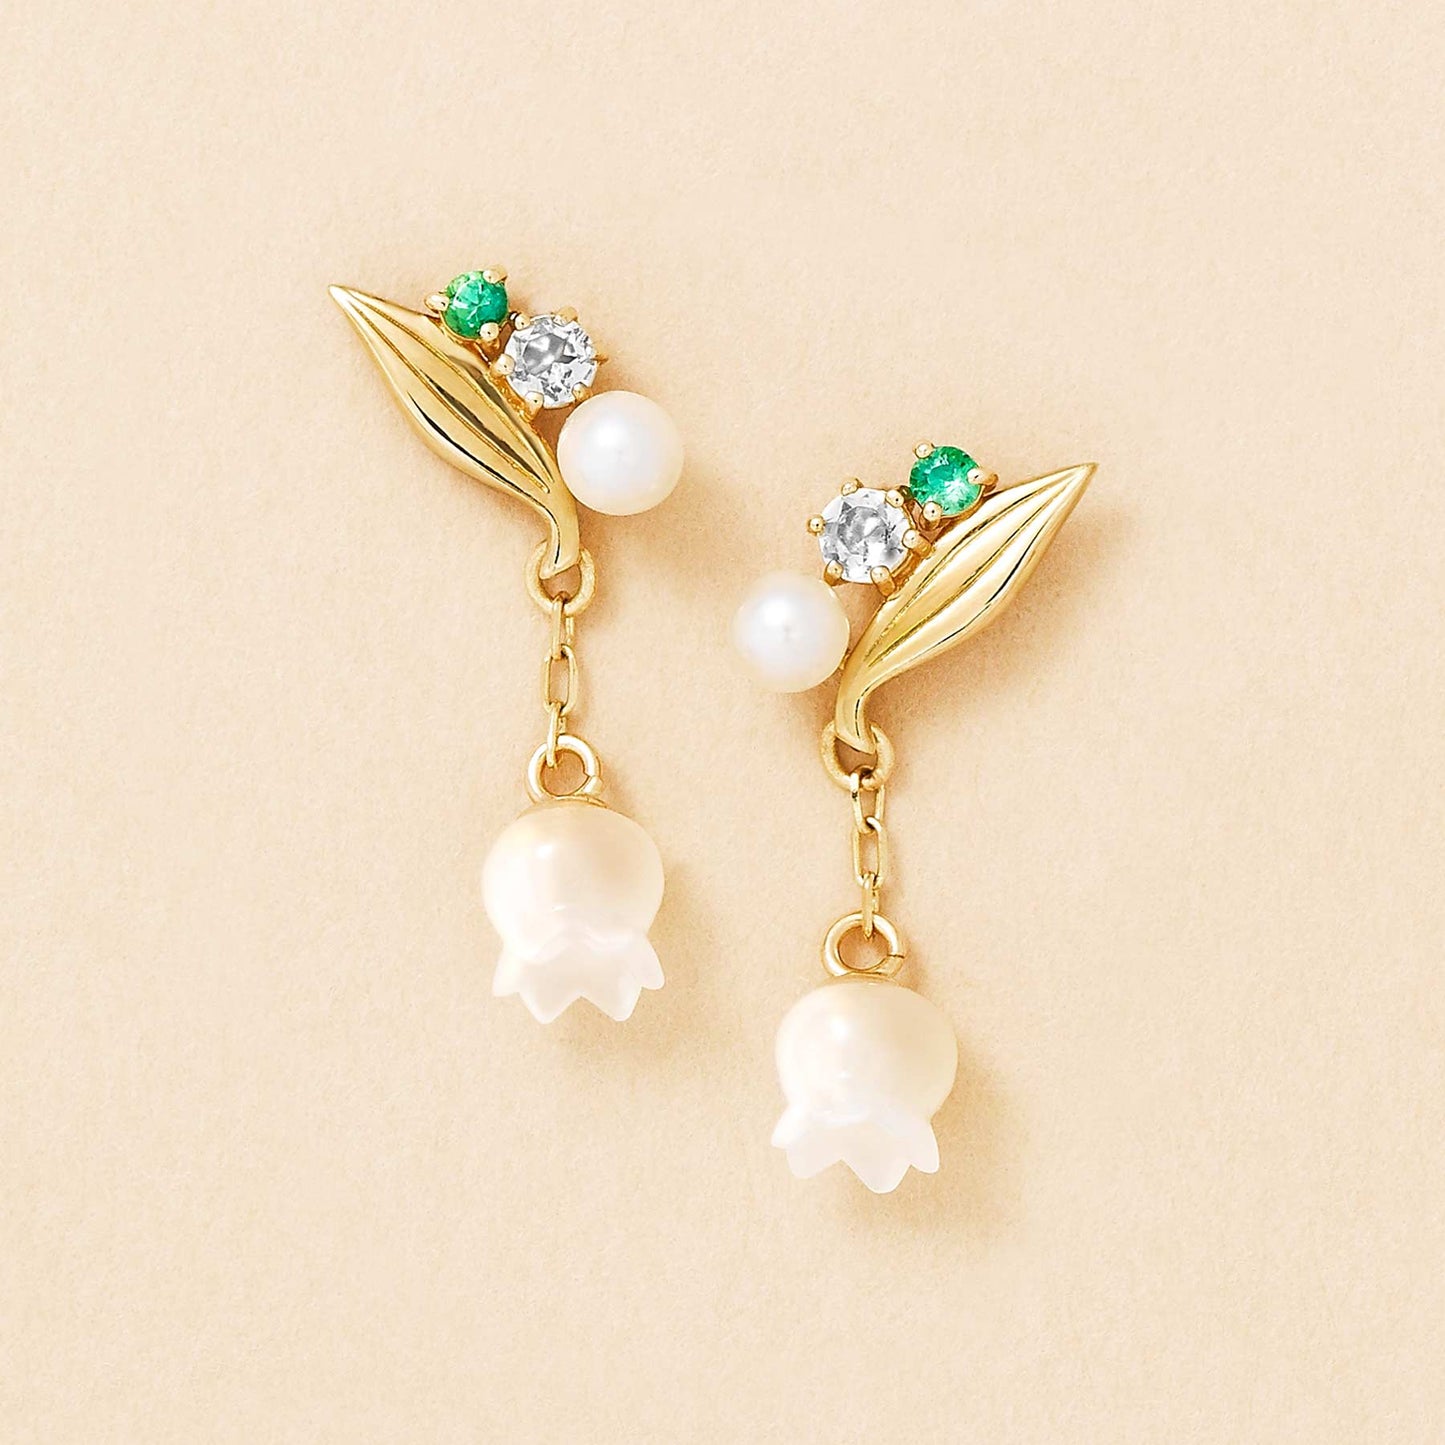 [Birth Flower Jewelry] May Lily of the valley Earrings (Carving) - Product Image